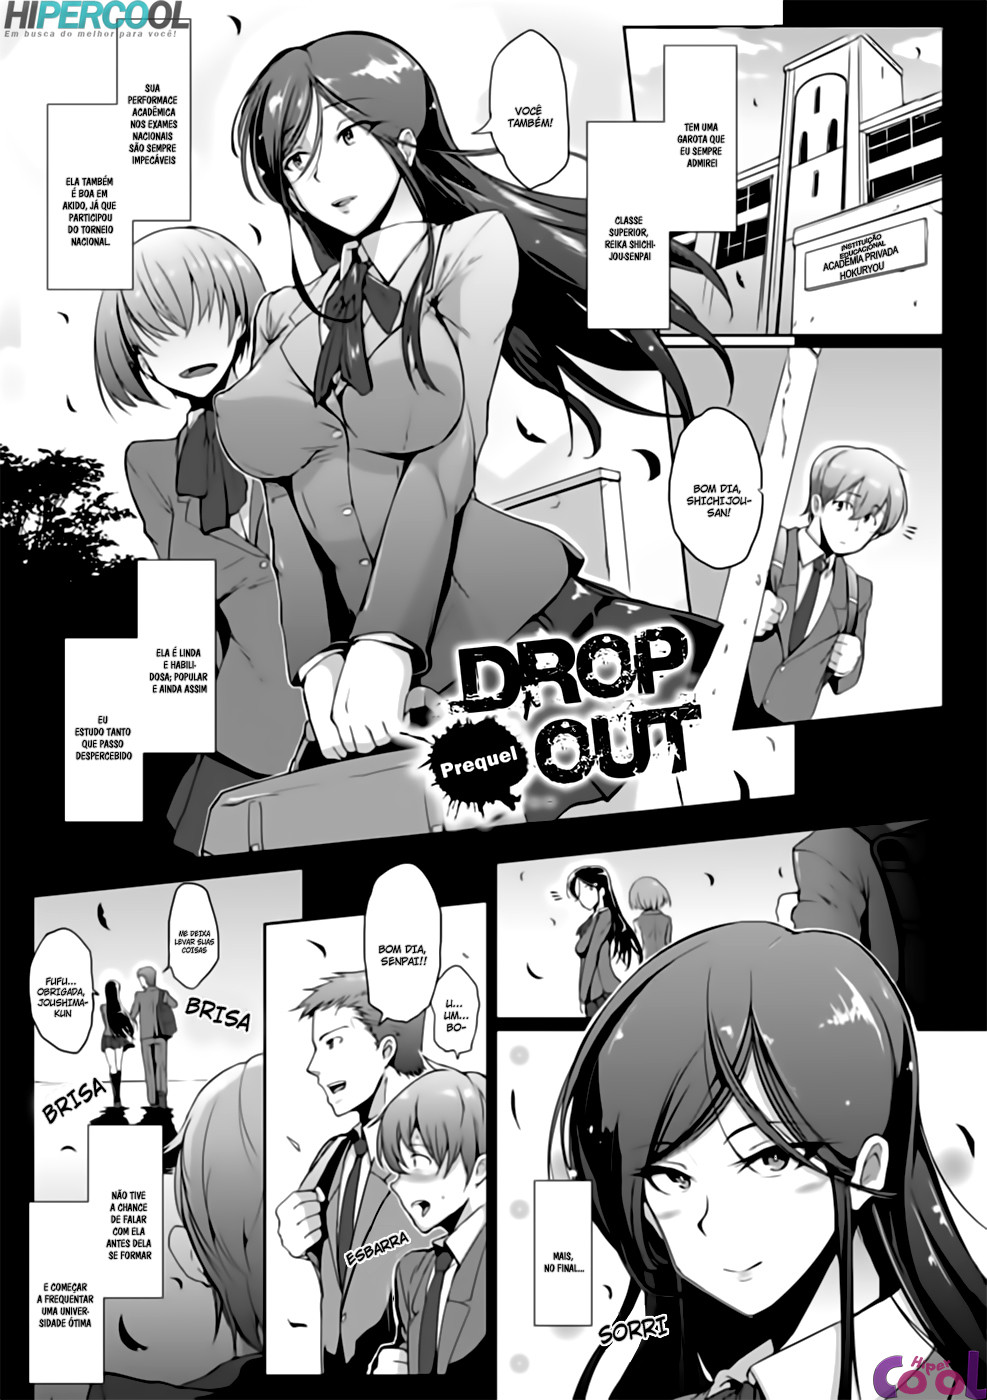 dropout-chapter-01-page-04.jpg